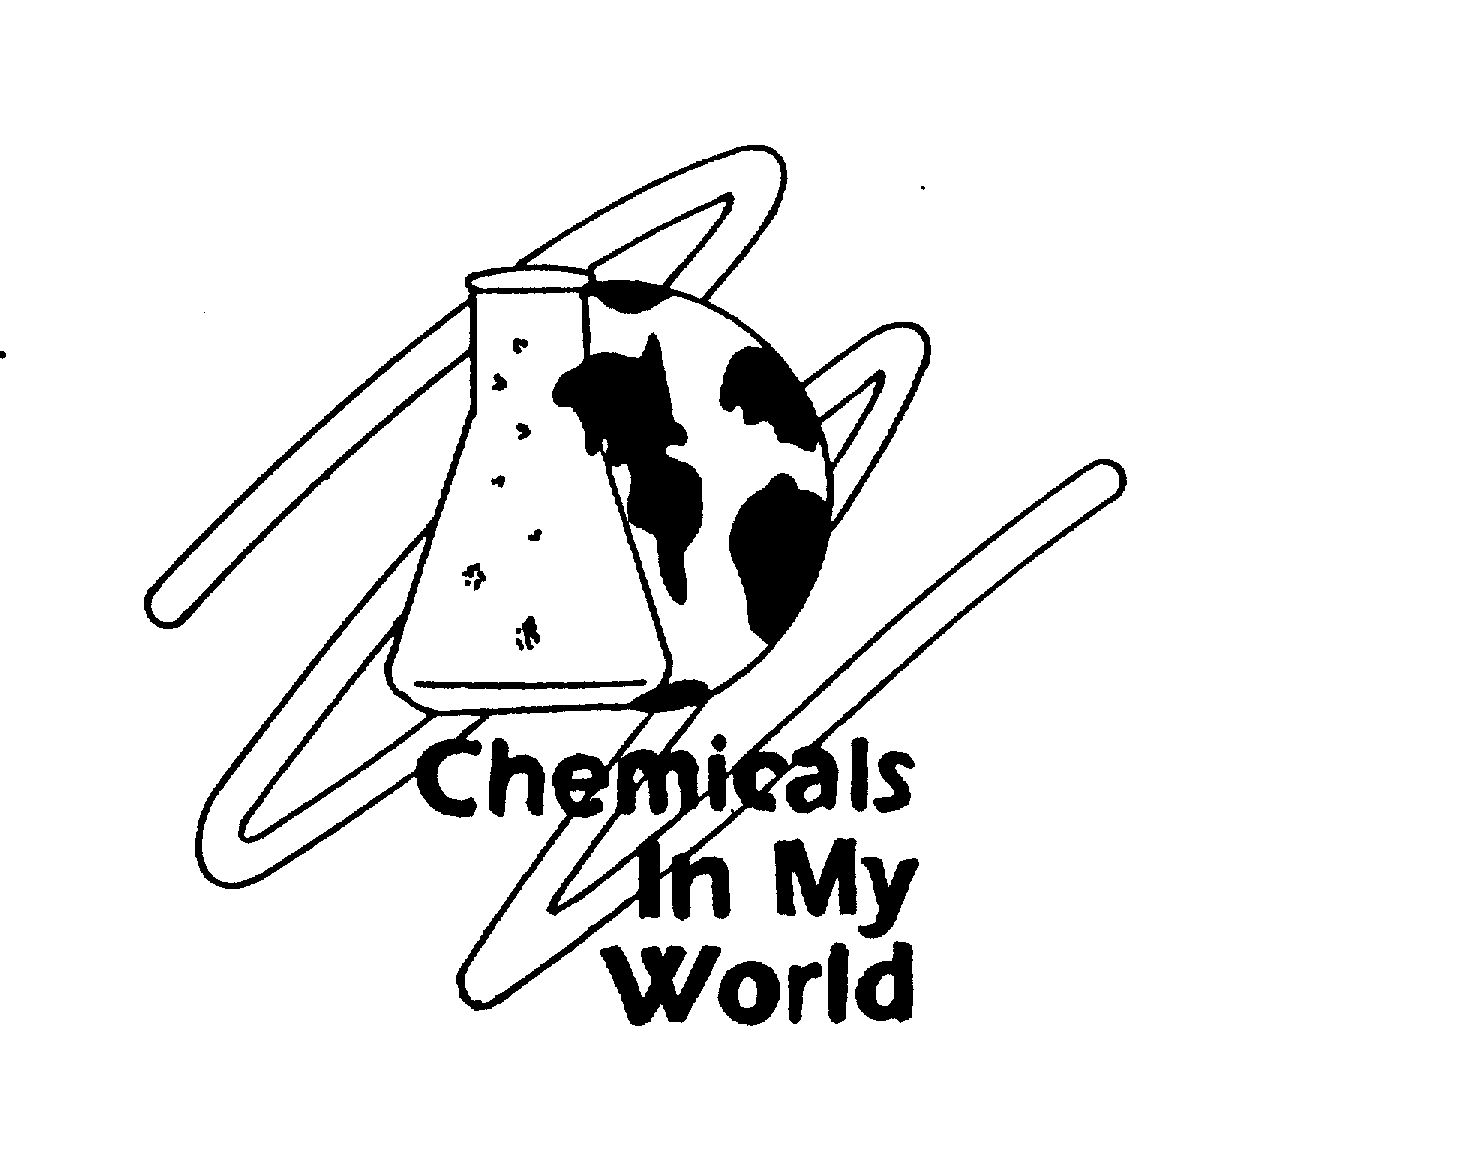  CHEMICALS IN MY WORLD